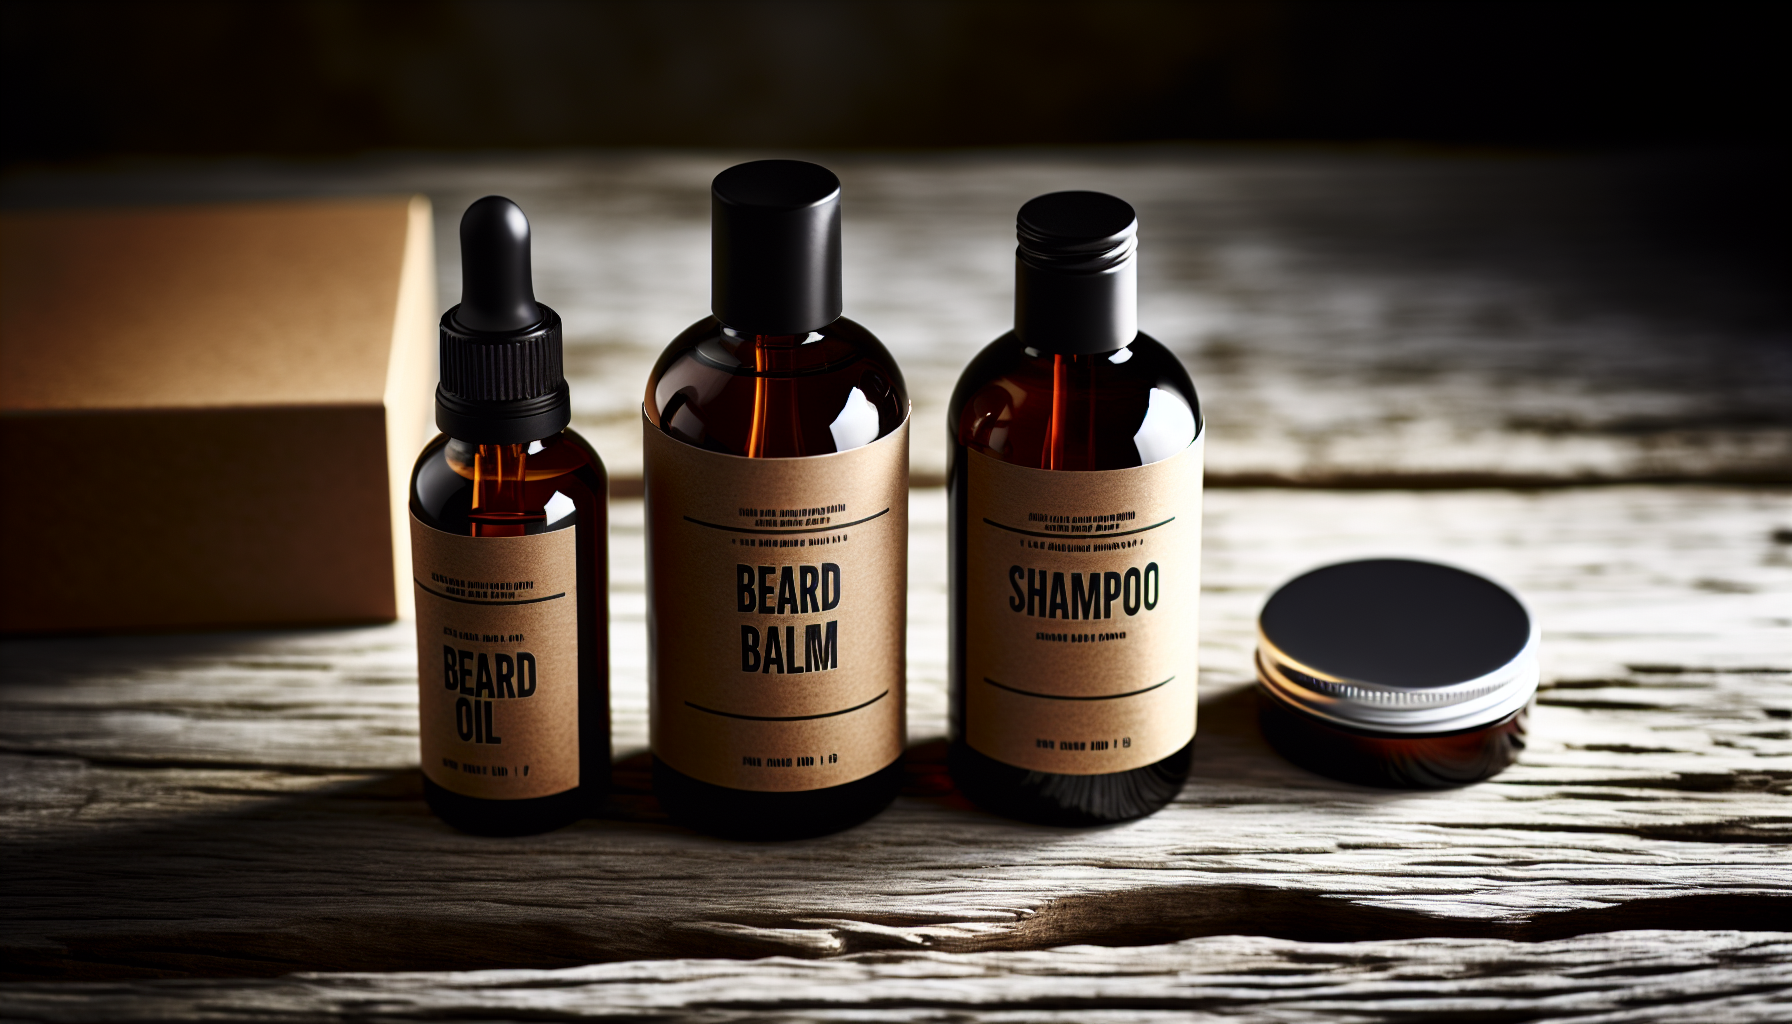 Bottles of beard oil, balm, and shampoo on a wooden surface